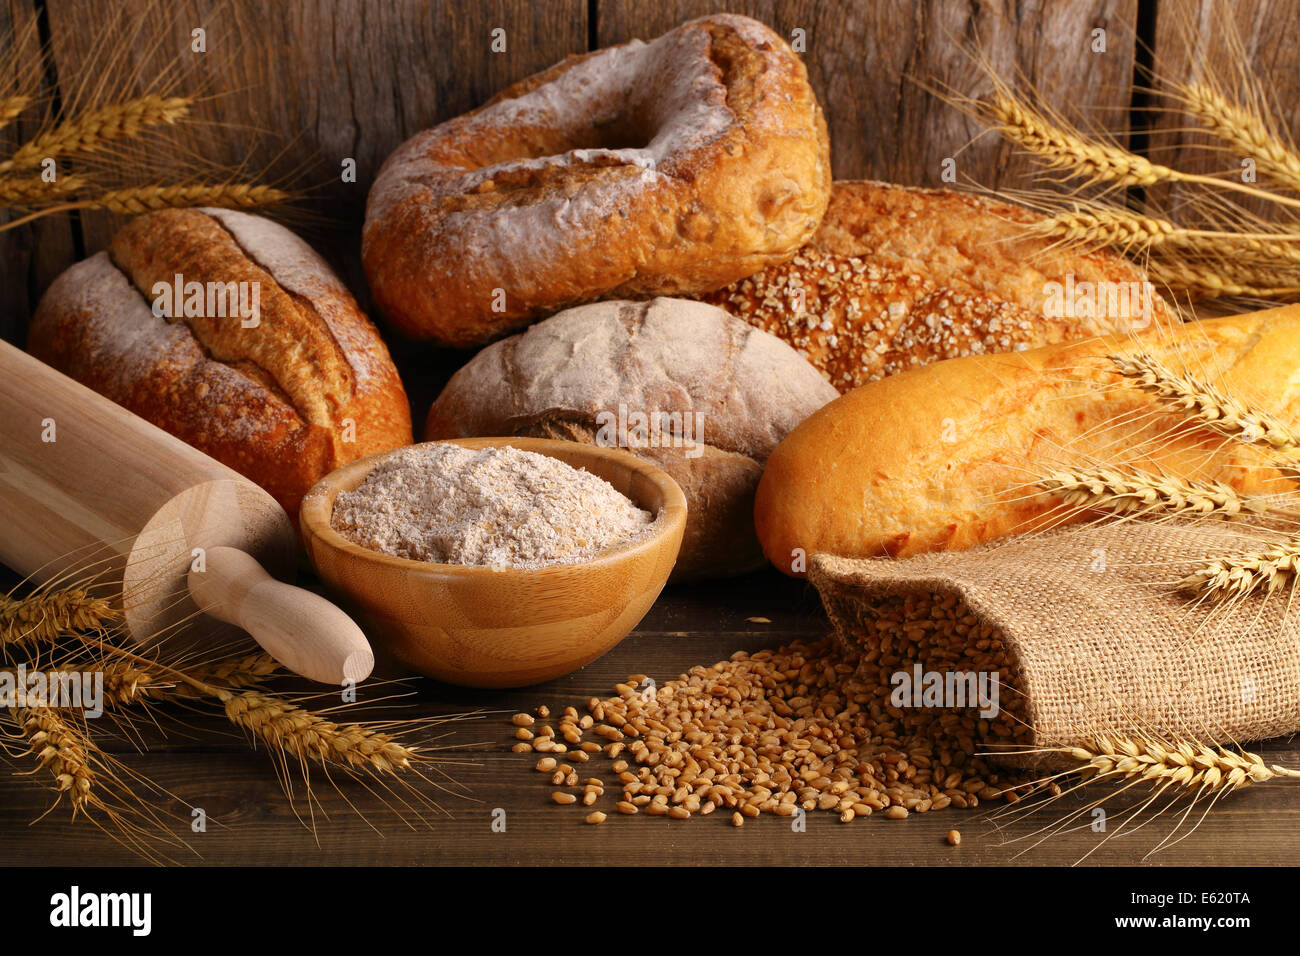 Bread with wheat grains Stock Photo